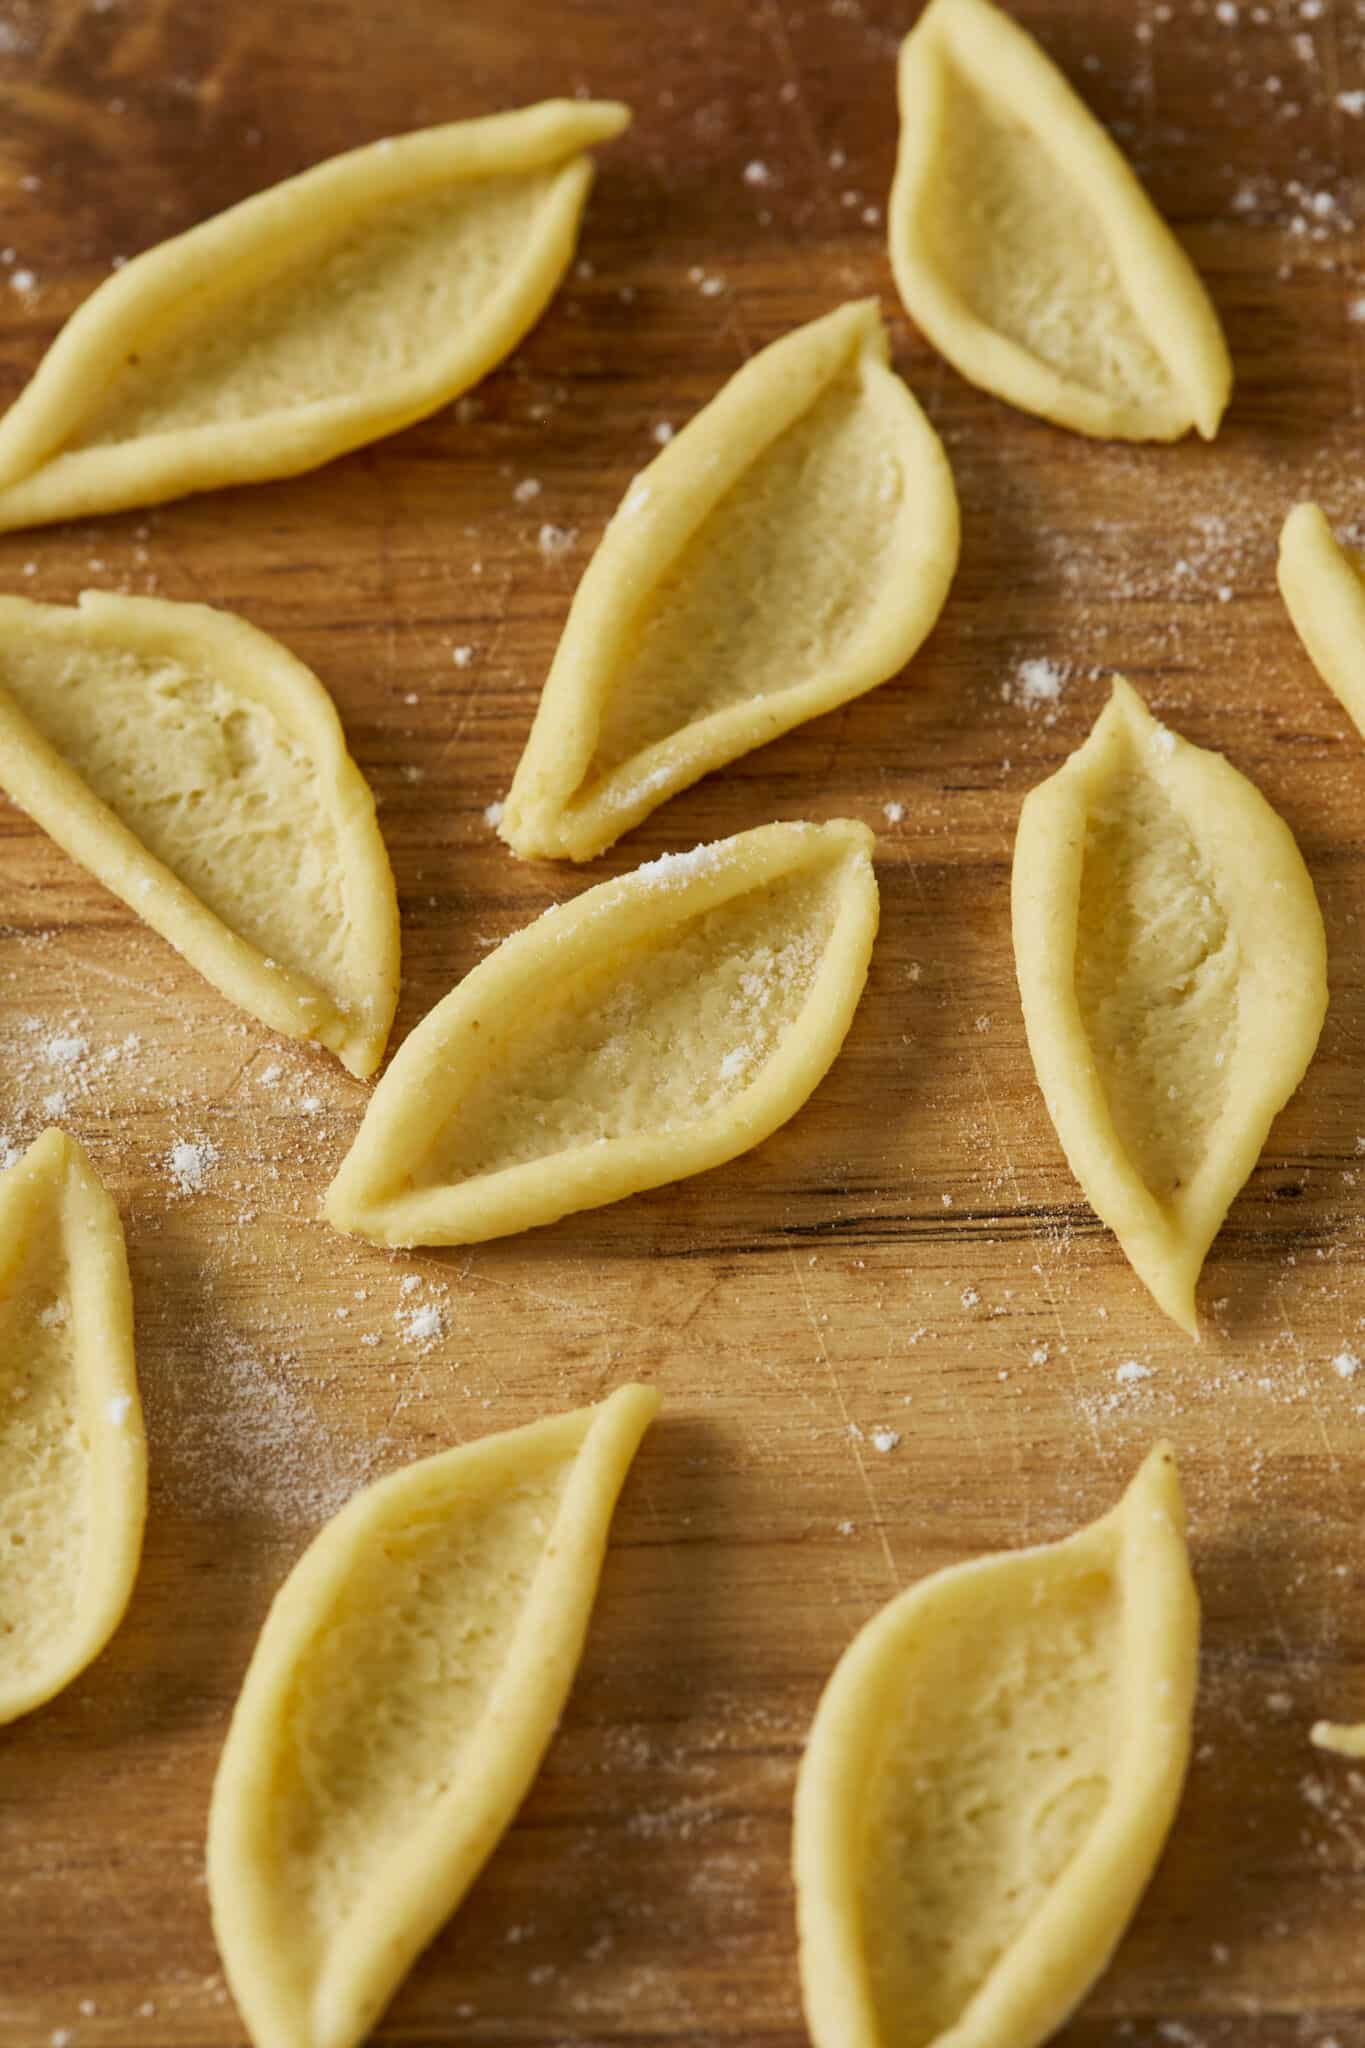 Olive Leaf Pasta is drying on a lightly-floured wood board. Its versatile flat, curved shape seems perfect for capturing every bite of your favorite sauce. 